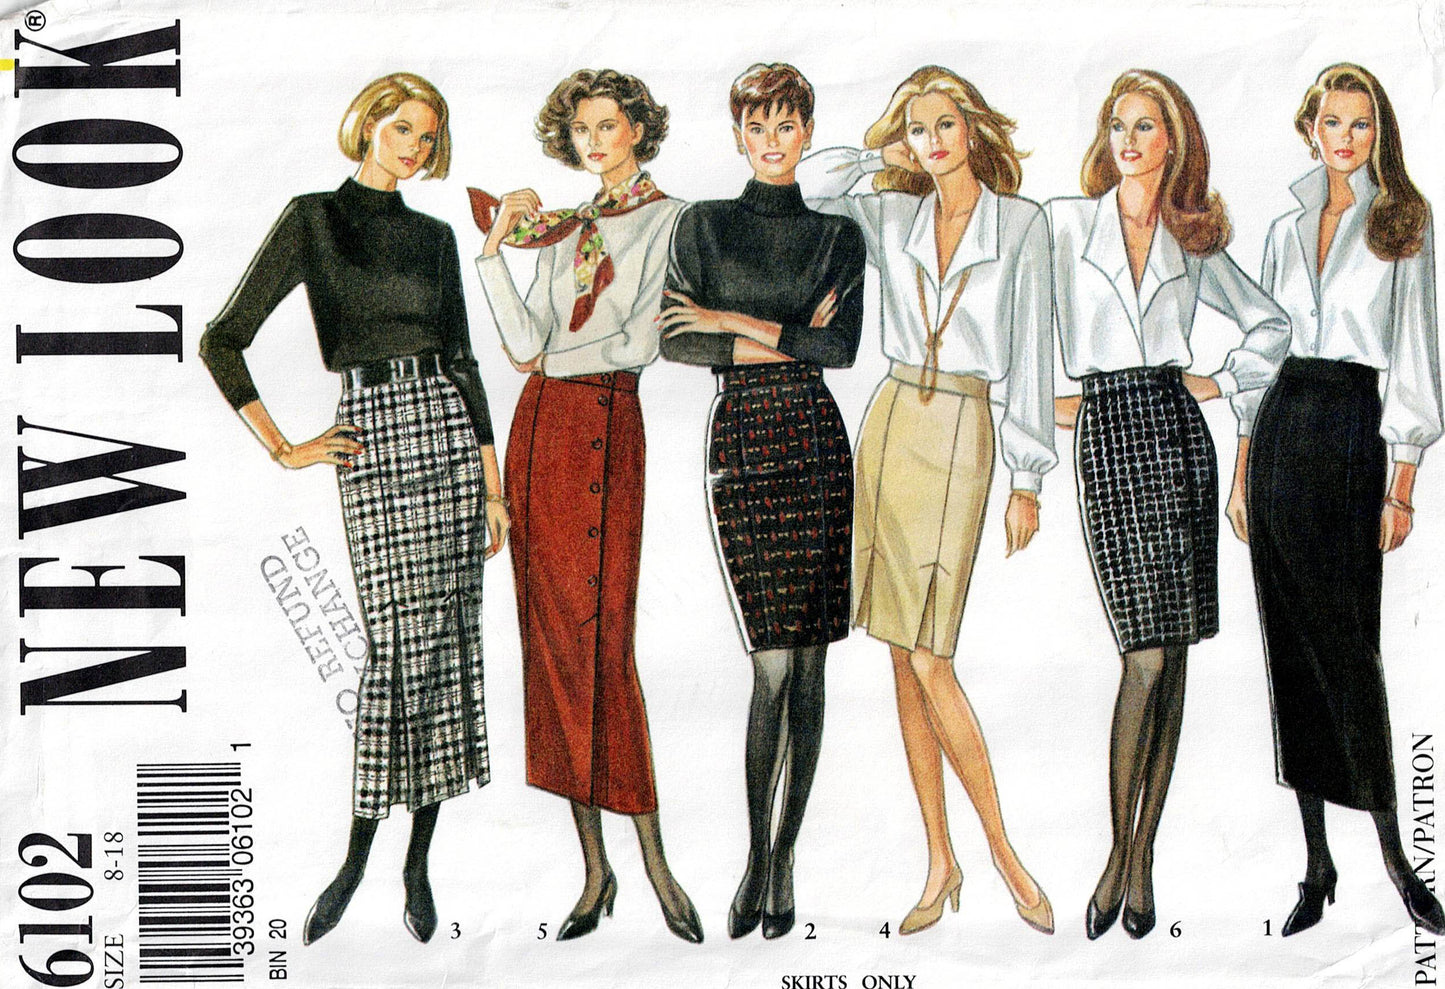 New Look 6102 Womens Wrap or Pleated Pencil Skirts 1990s Vintage Sewing Pattern Size 8 - 18 UNCUT Factory Folded